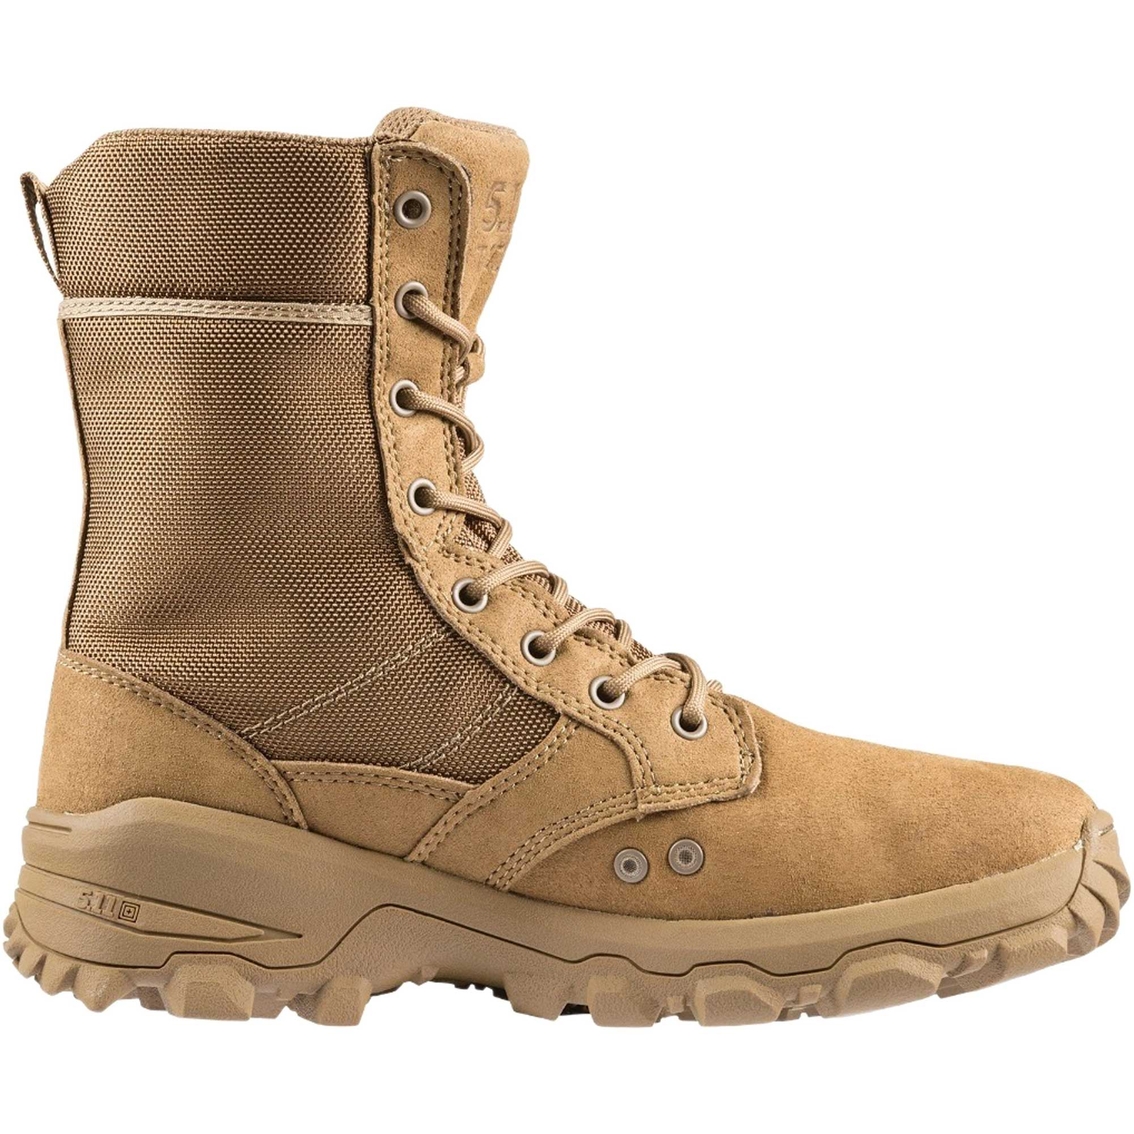 5.11 Men's Speed 3.0 Jungle Dark Coyote Boots | Casual | Shoes | Shop ...